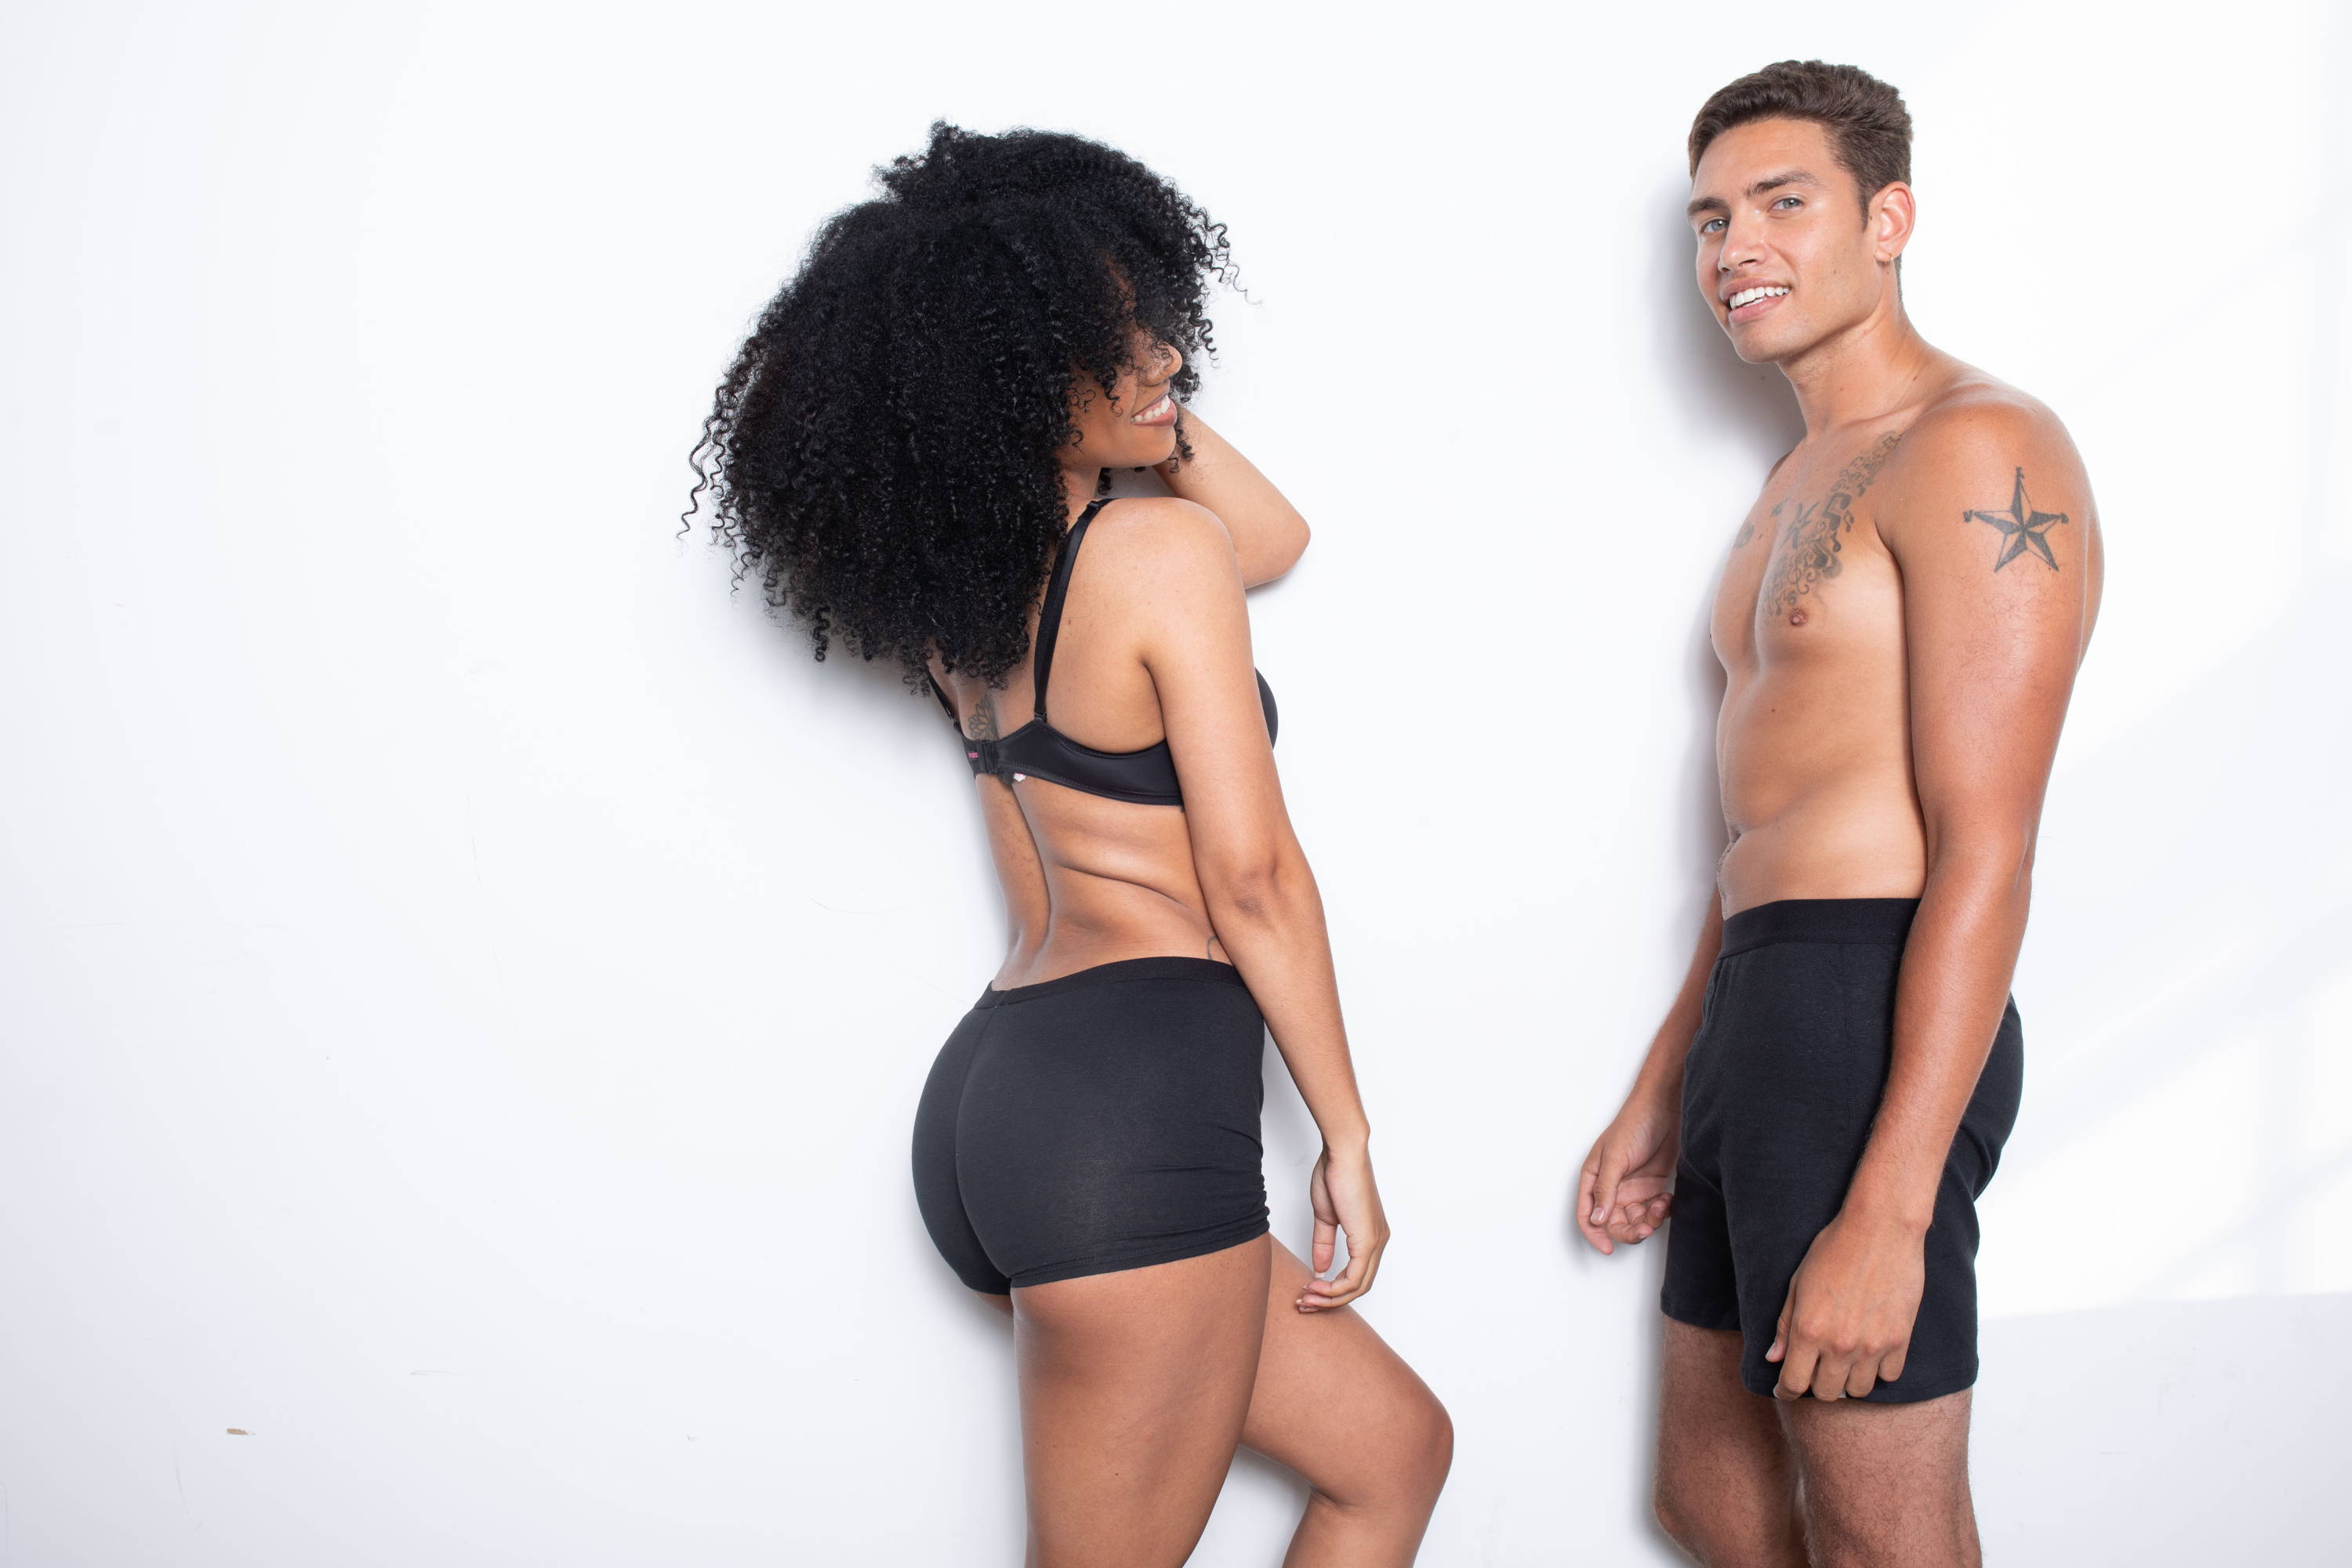 How to choose your perfect underwear size